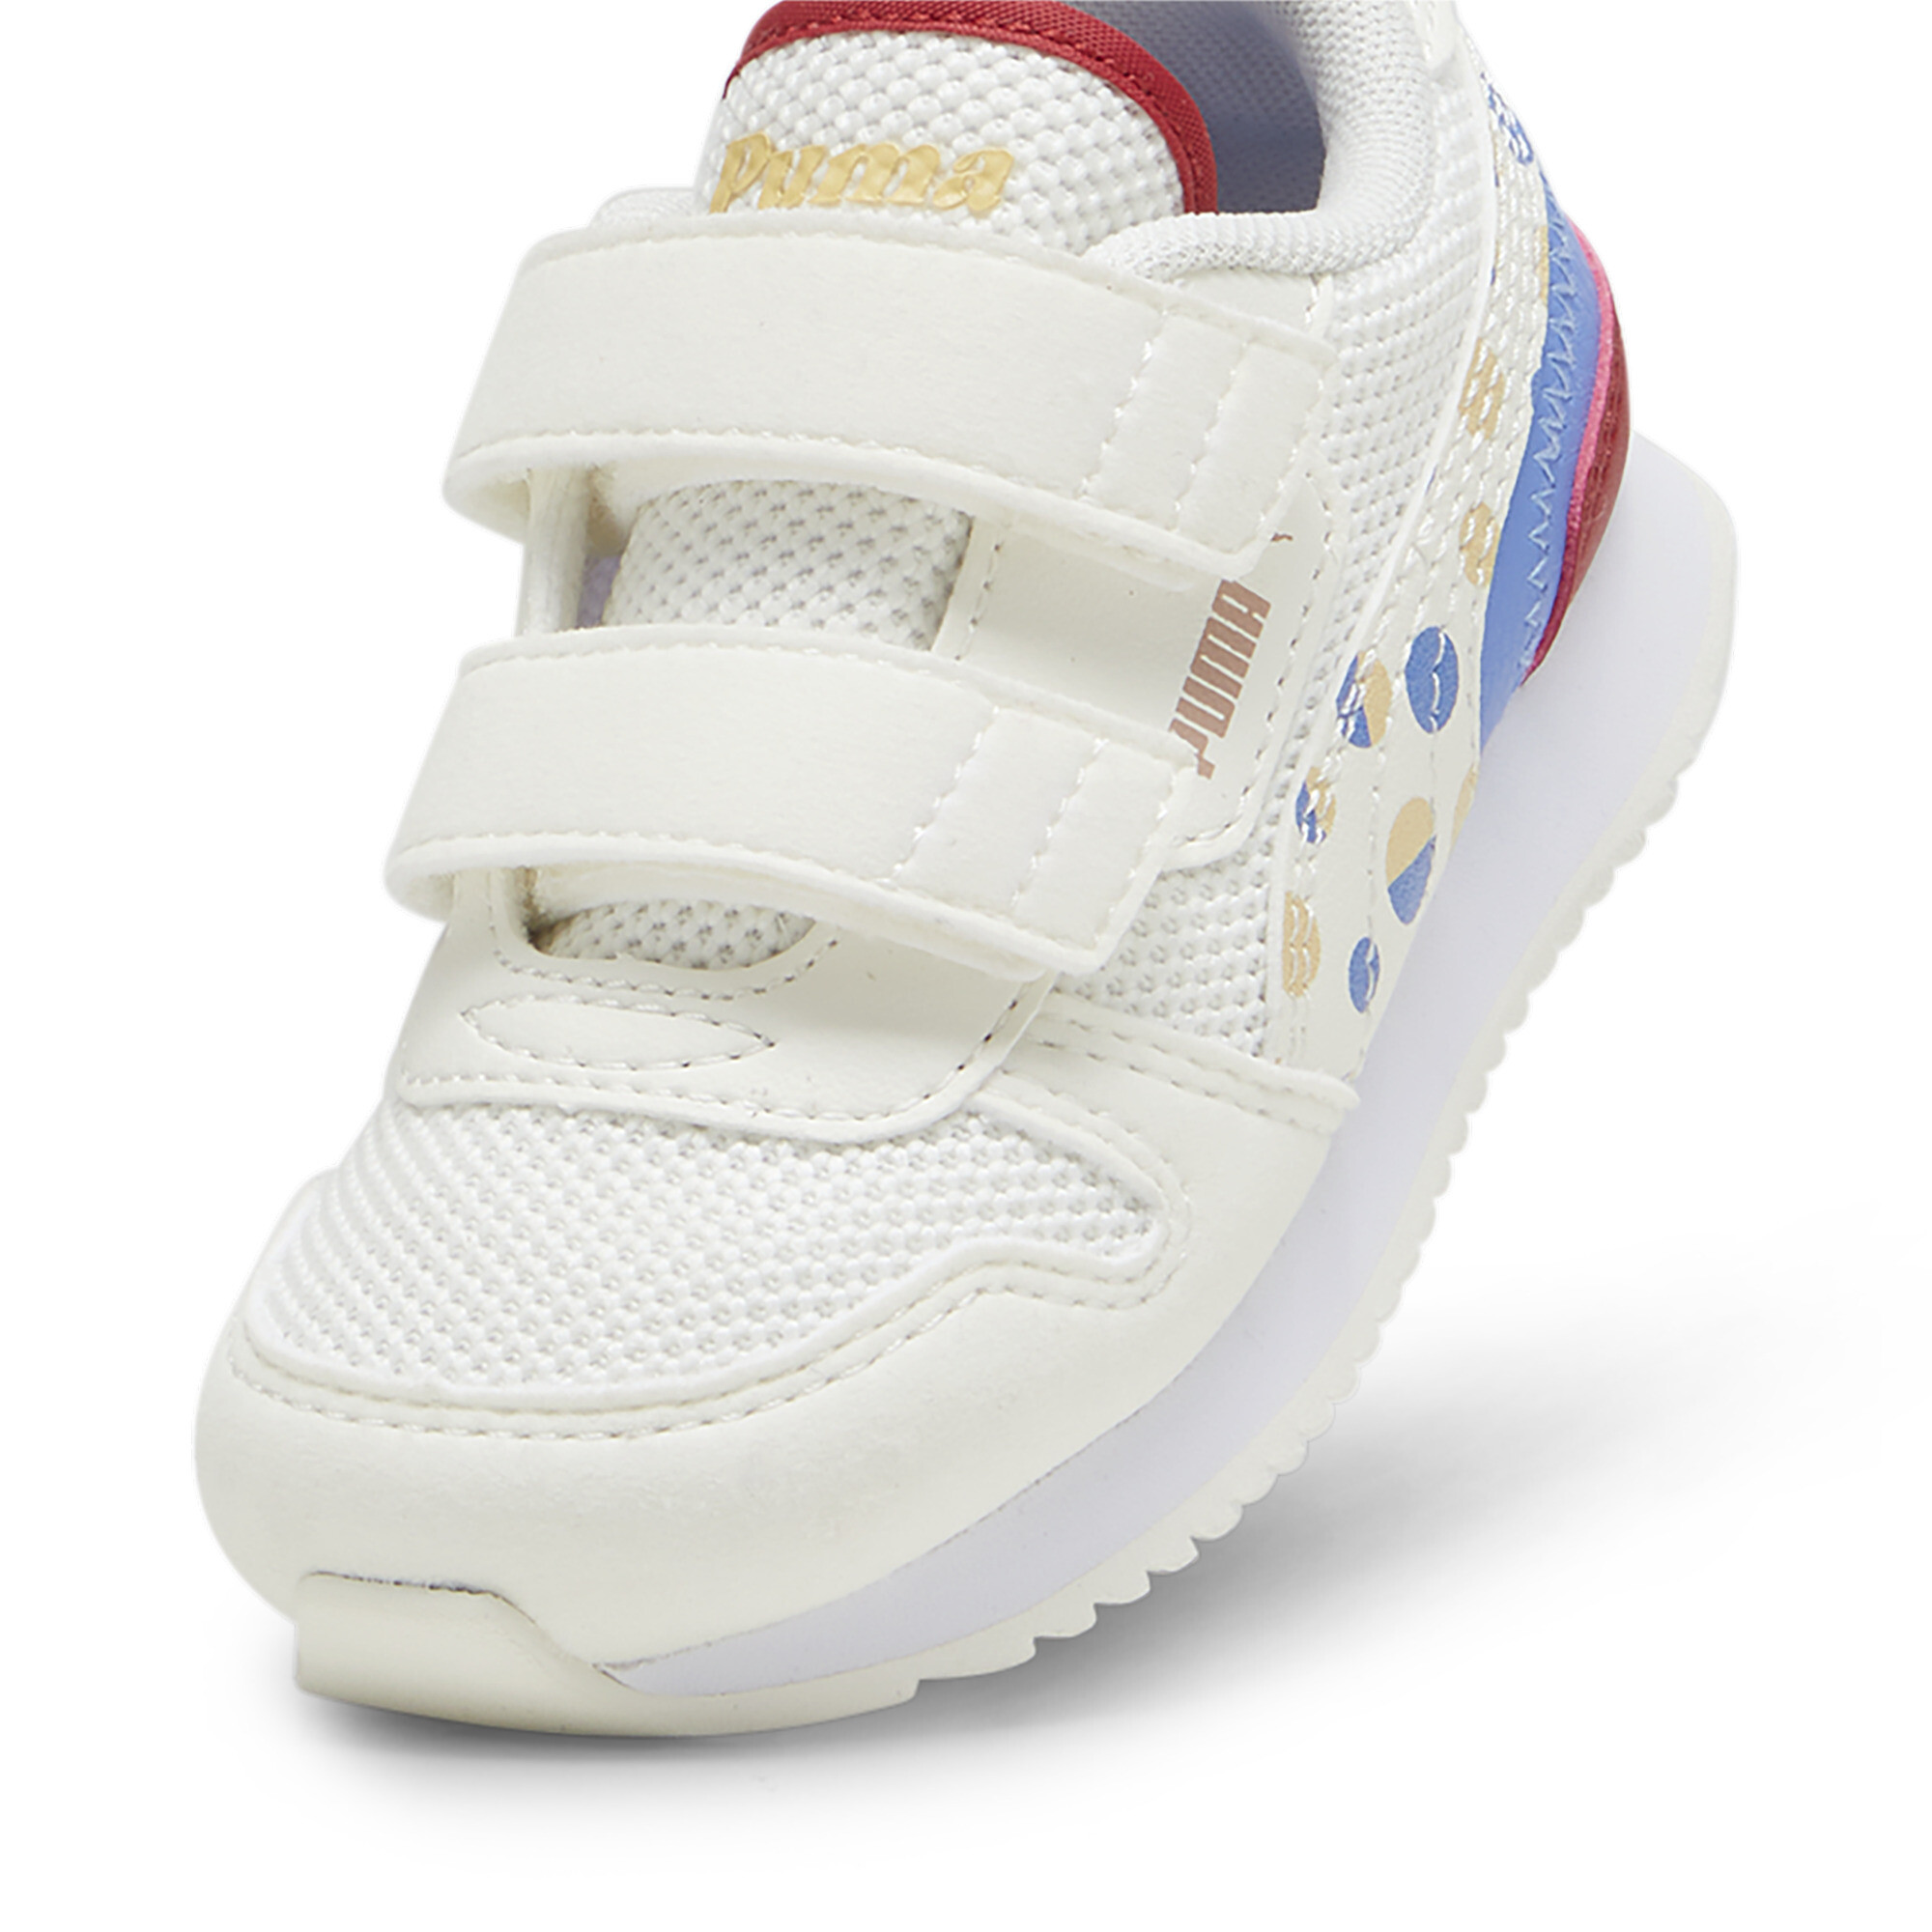 Puma R78 Summer Camp Toddlers' Sneakers, White, Size 22, Shoes